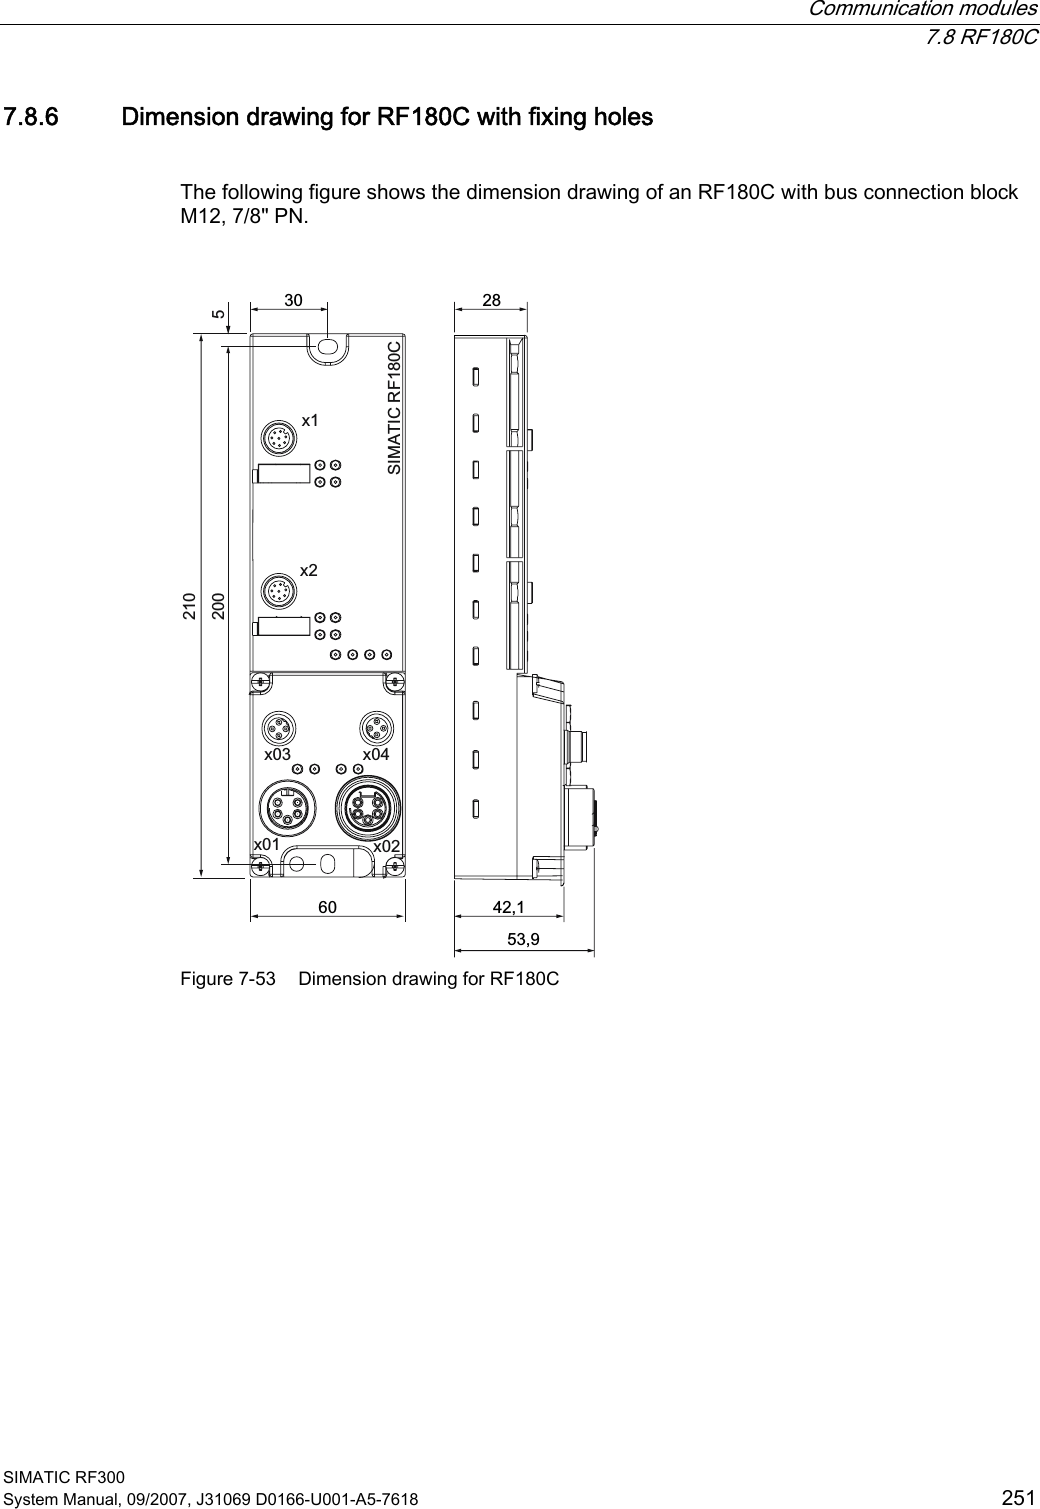  Communication modules  7.8 RF180C SIMATIC RF300 System Manual, 09/2007, J31069 D0166-U001-A5-7618  251 7.8.6 Dimension drawing for RF180C with fixing holes  The following figure shows the dimension drawing of an RF180C with bus connection block M12, 7/8&quot; PN.   [[6,0$7,&amp;5)&amp;[ [[ [ Figure 7-53  Dimension drawing for RF180C 